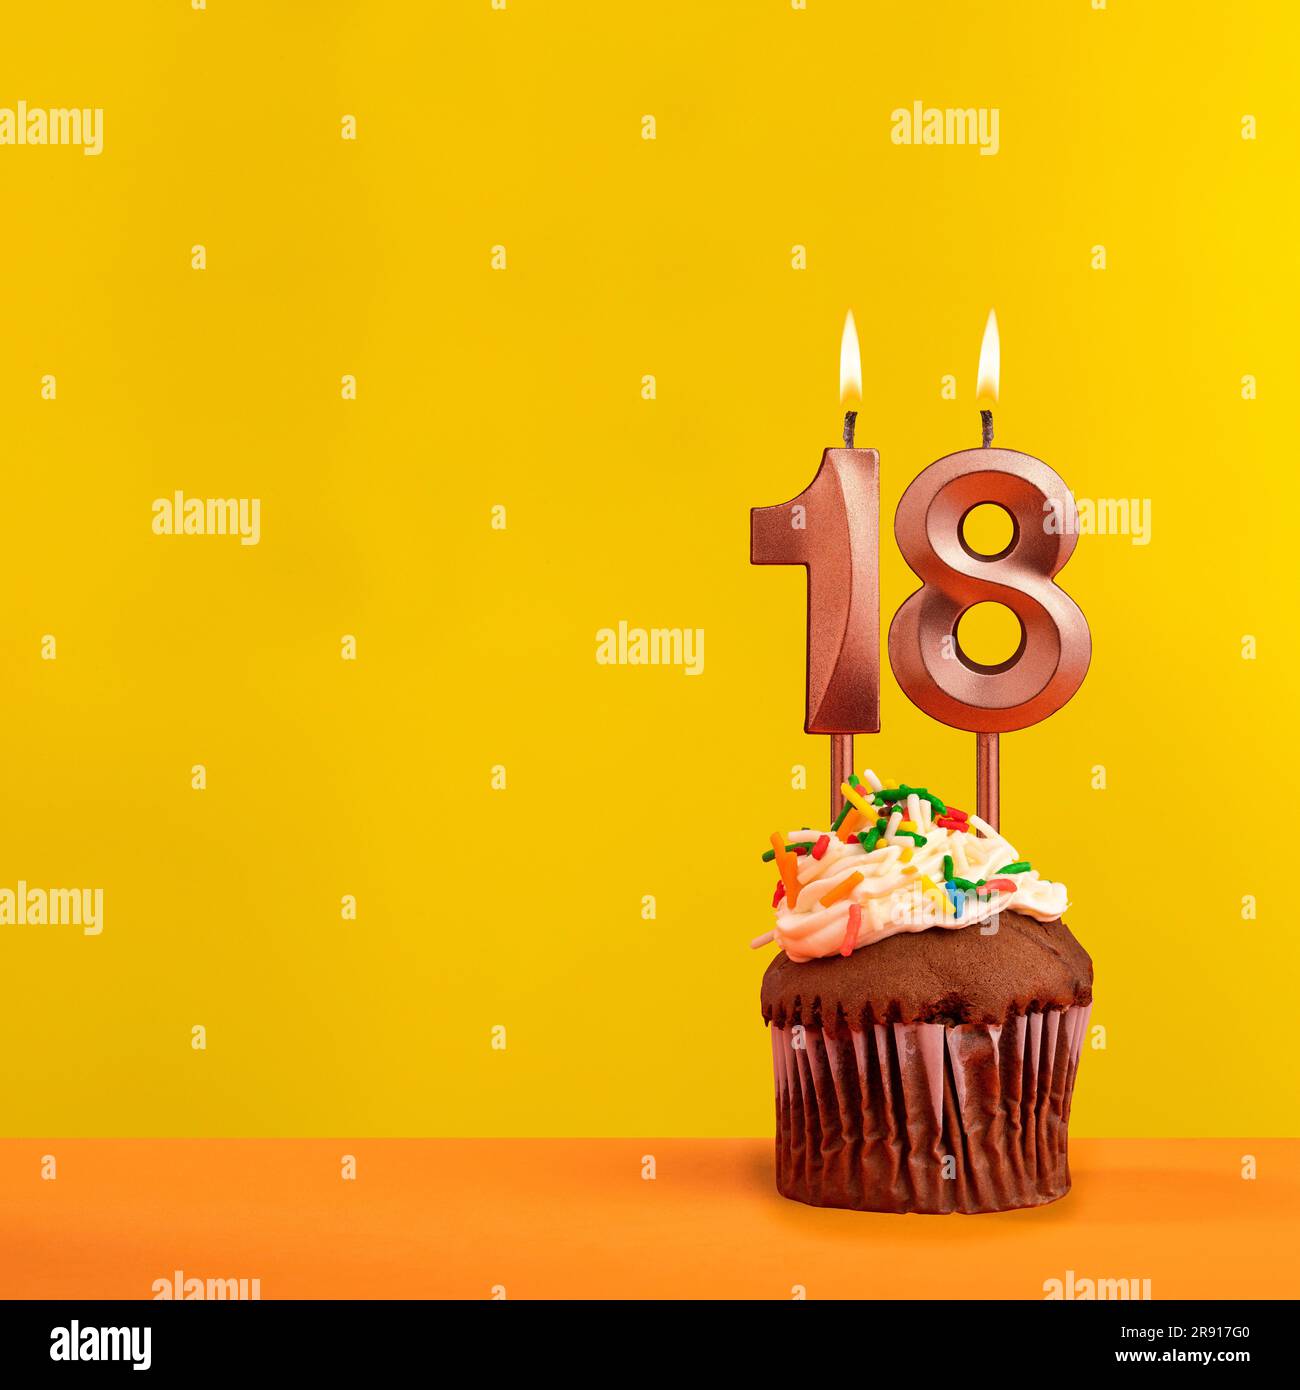 18+ Images Of Birthday Candles